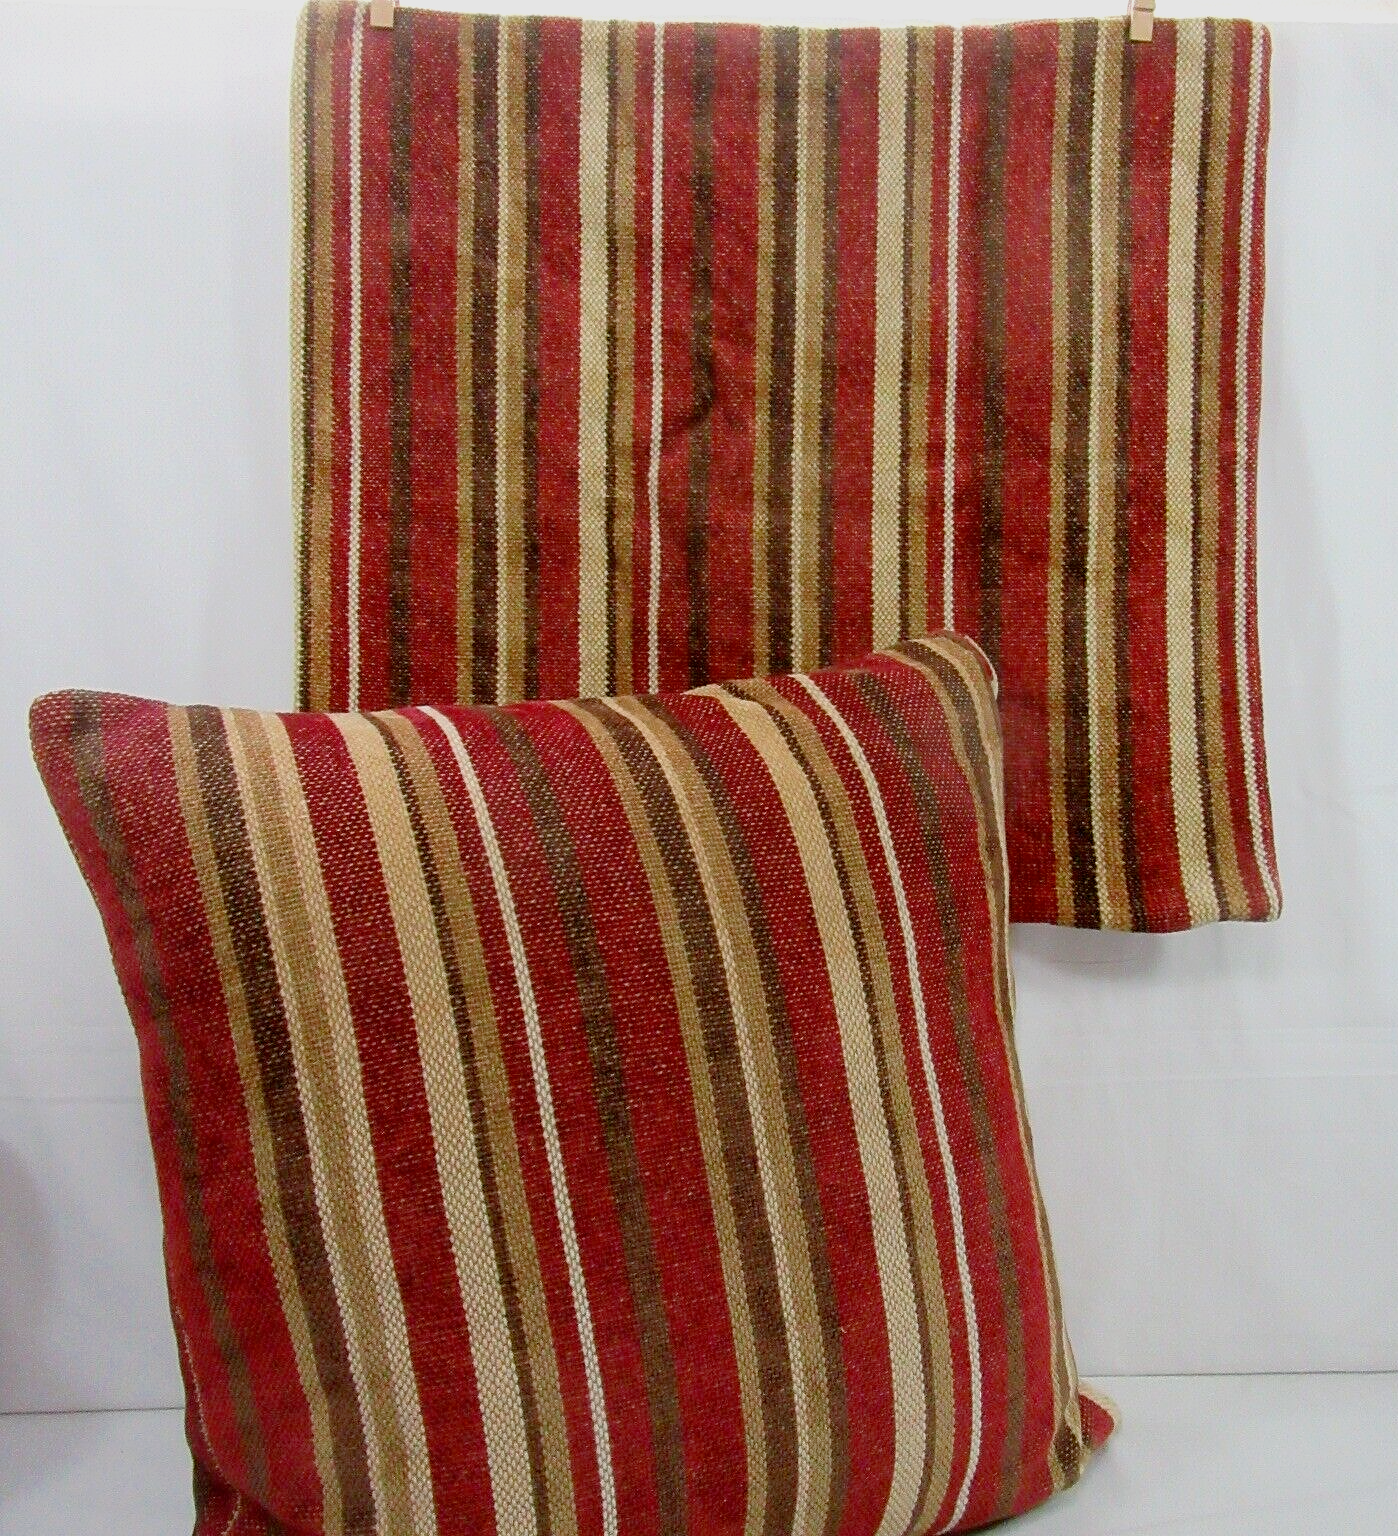 Restoration Hardware Chenille Multistripe Red 20-inch Square Pillow and Cover - $68.00